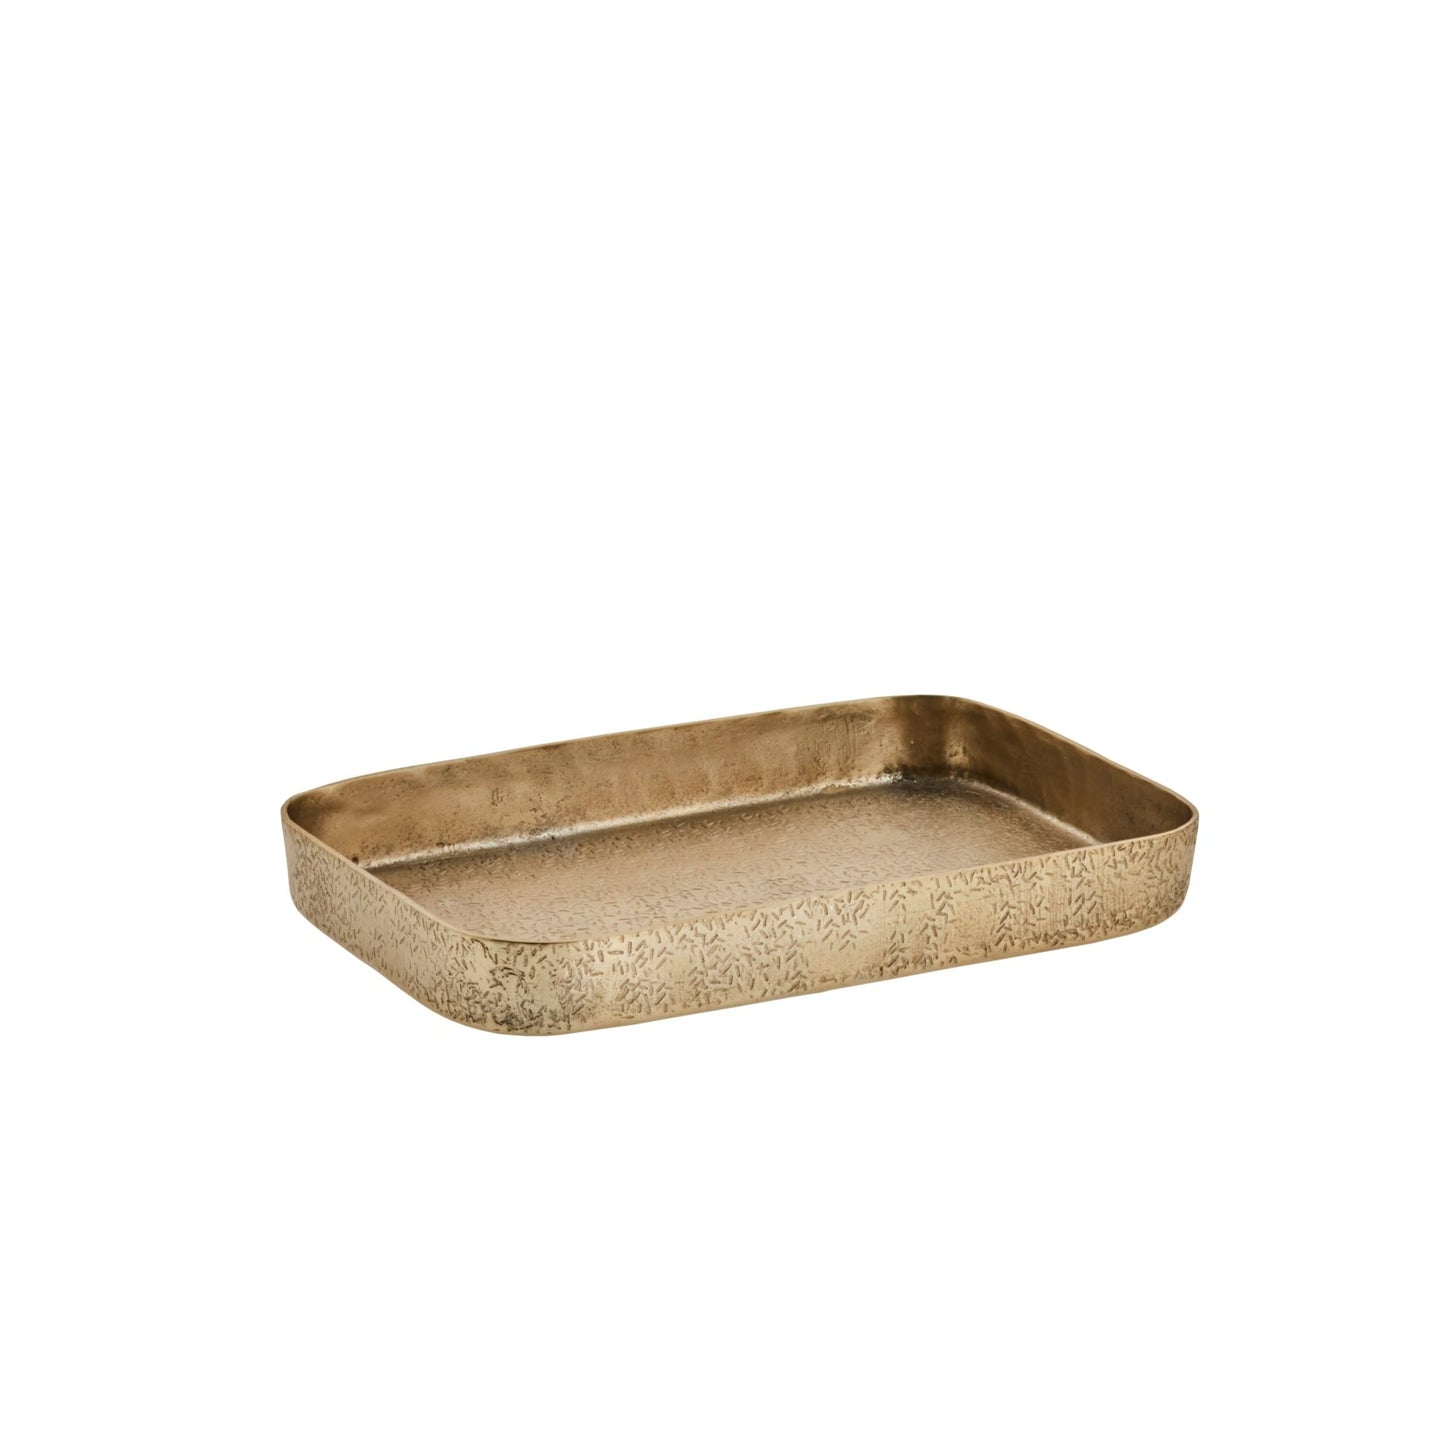 Small hammered gold decorative tray